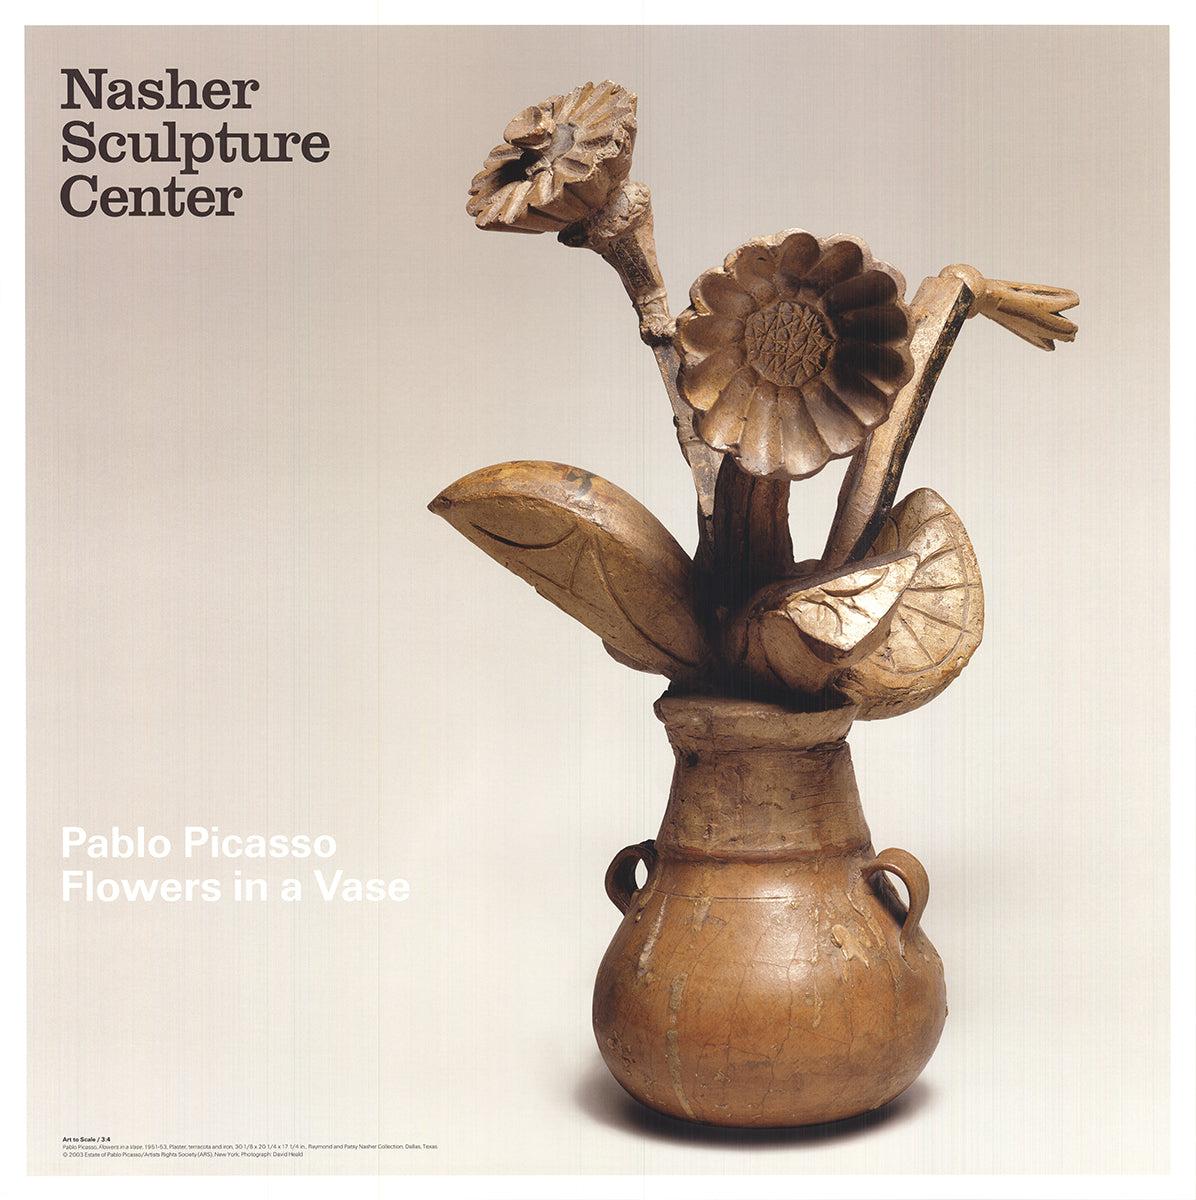 Paper Size: 24 x 24 inches ( 60.96 x 60.96 cm )
Image Size: 23 x 23 inches ( 58.42 x 58.42 cm )
Framed: No
Condition: A-: Near Mint, very light signs of handling

Additional Details: Poster for the Nasher Sculpture Center, Dallas. Published by the